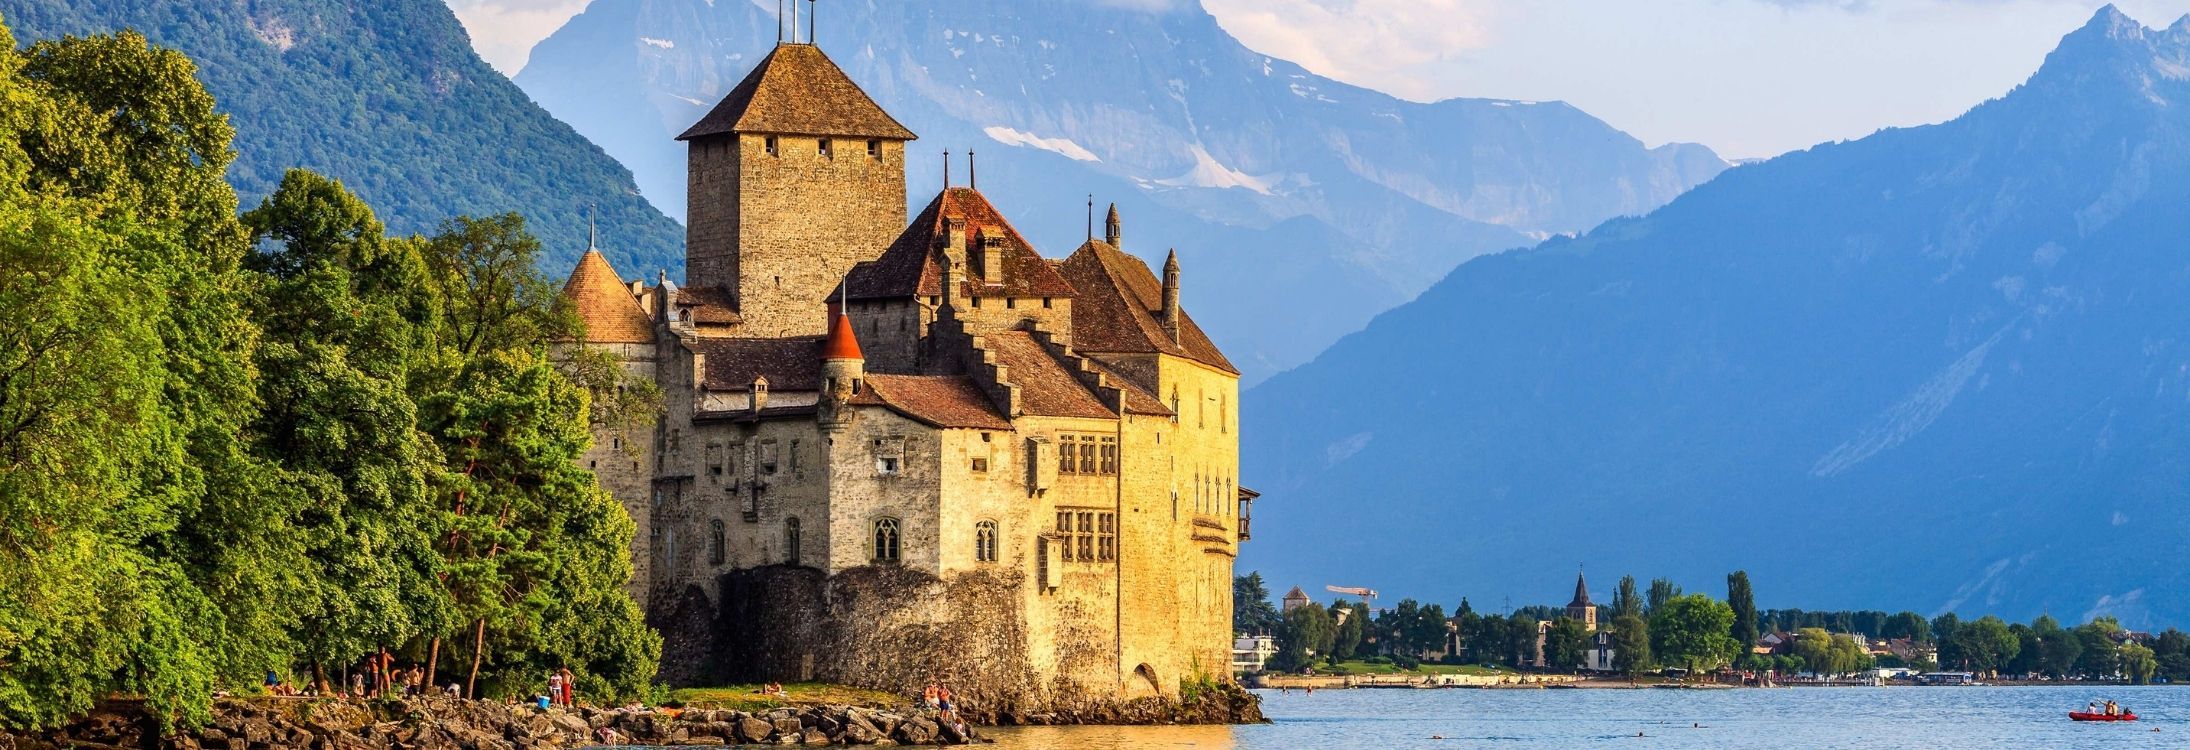 Incredible Castles around the World